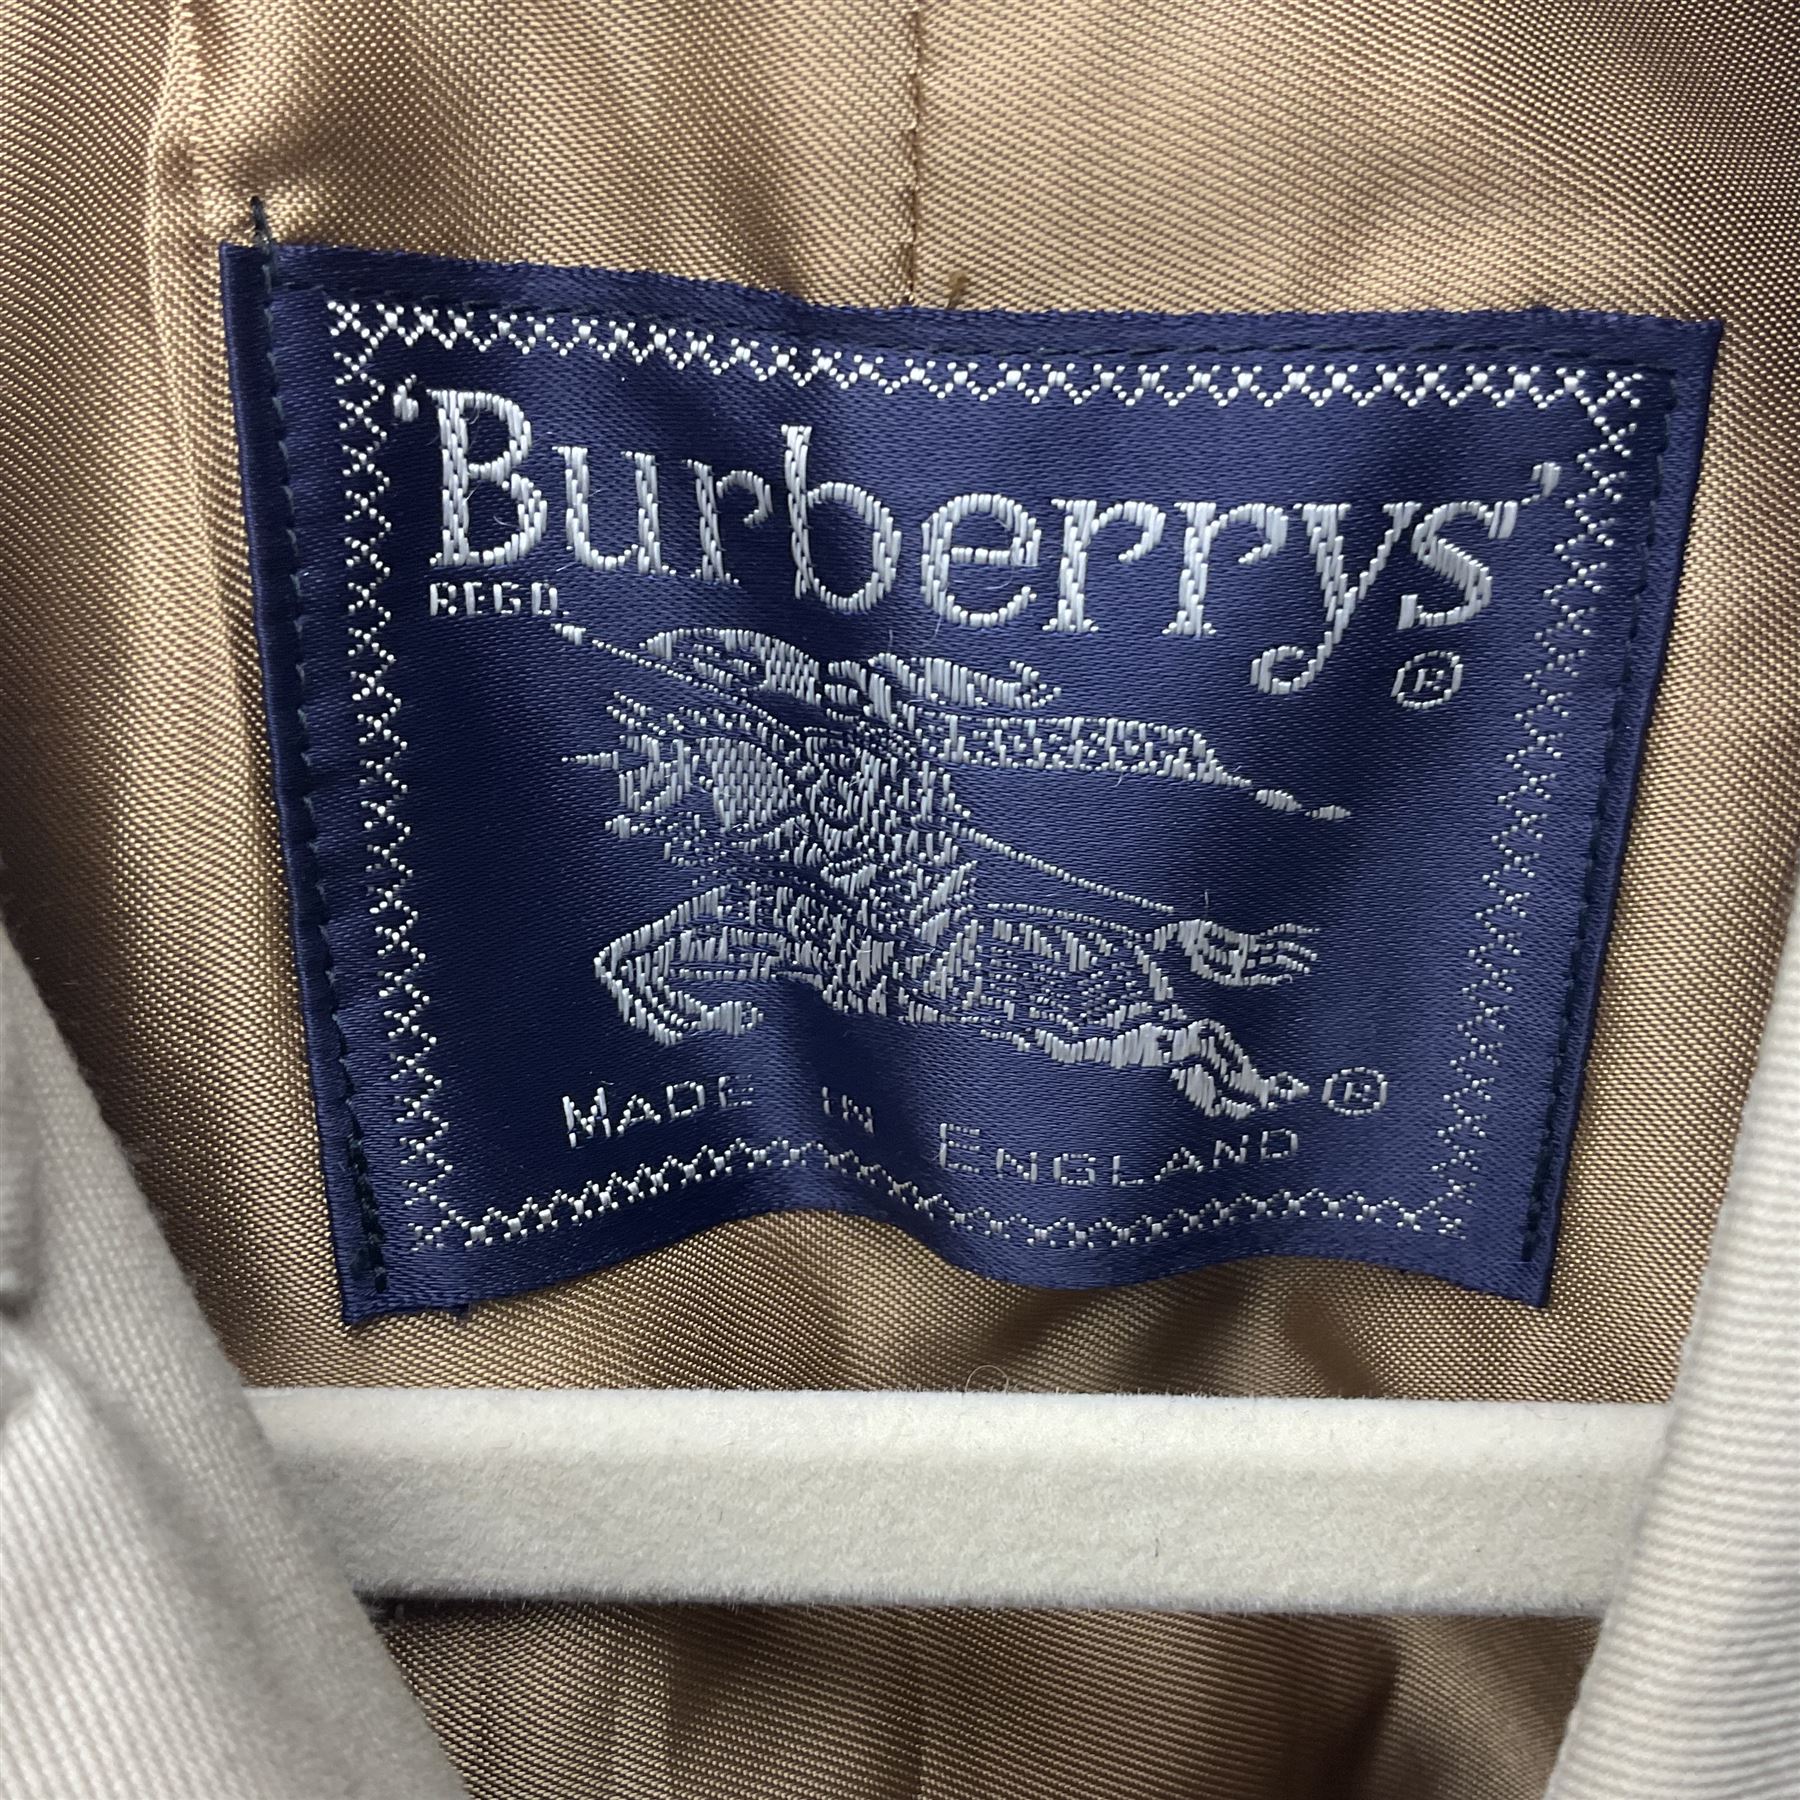 Ladies Burberry double breasted trench coat - Image 2 of 25